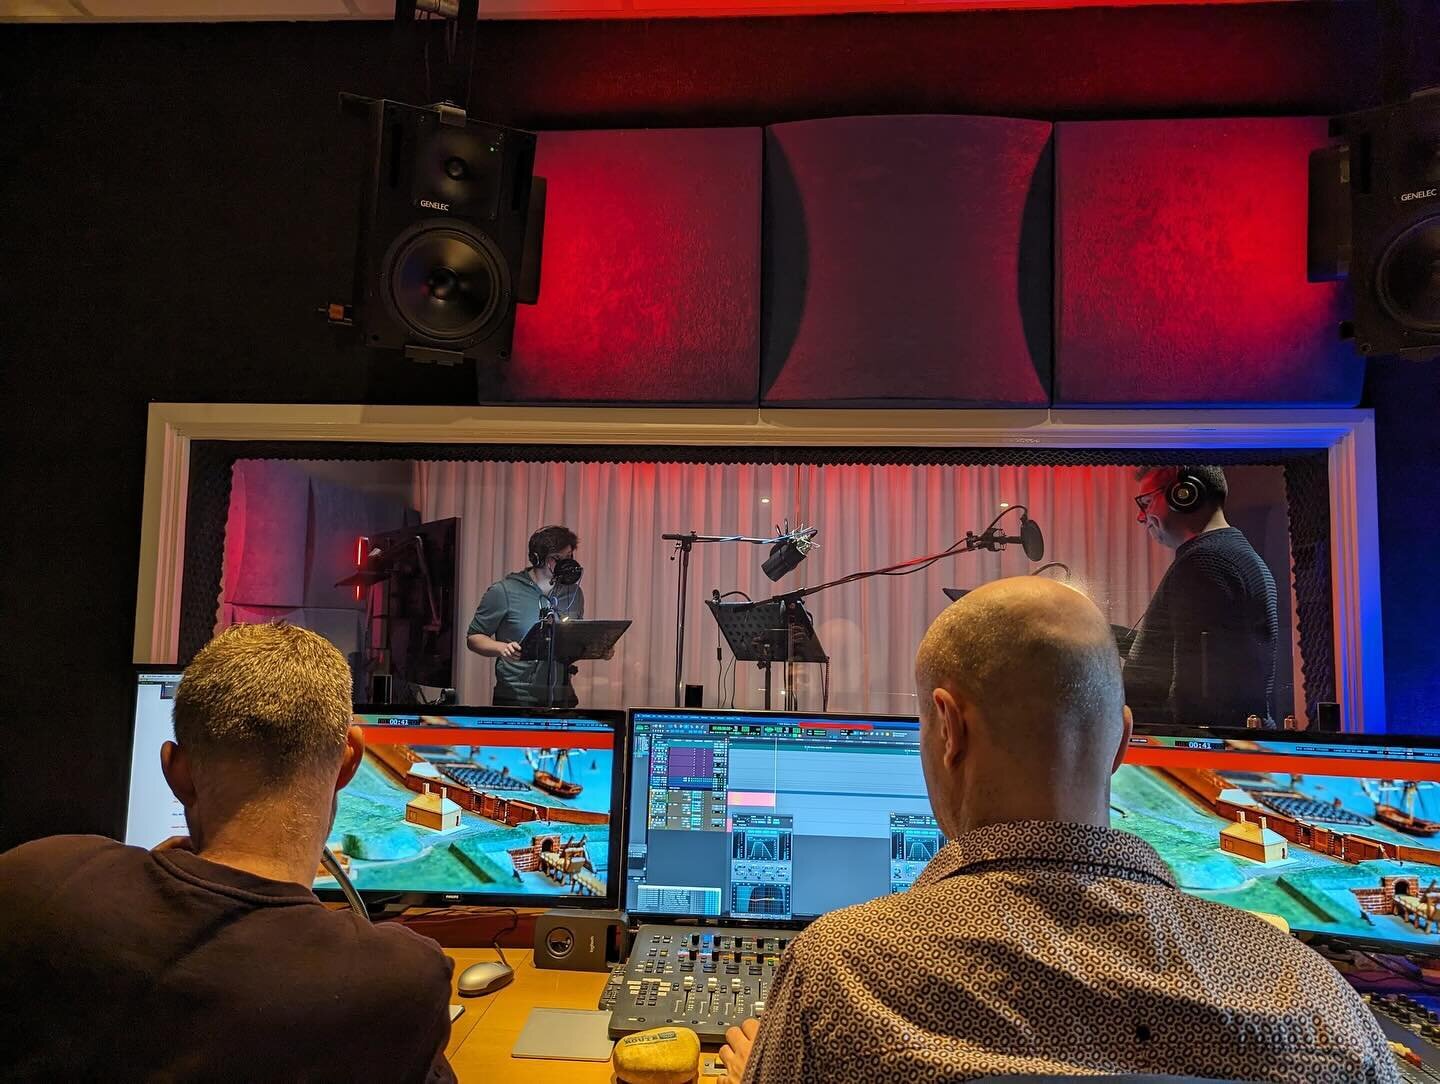 Together with @bobkommer studio, we had a lot of fun recording the voice-over for the upcoming exhibition at @fortresseholland museum. Our colleagues Jelle, Robbert, Kevin, and Ramon stepped into the roles of voice actors and got to play sailors.

Th